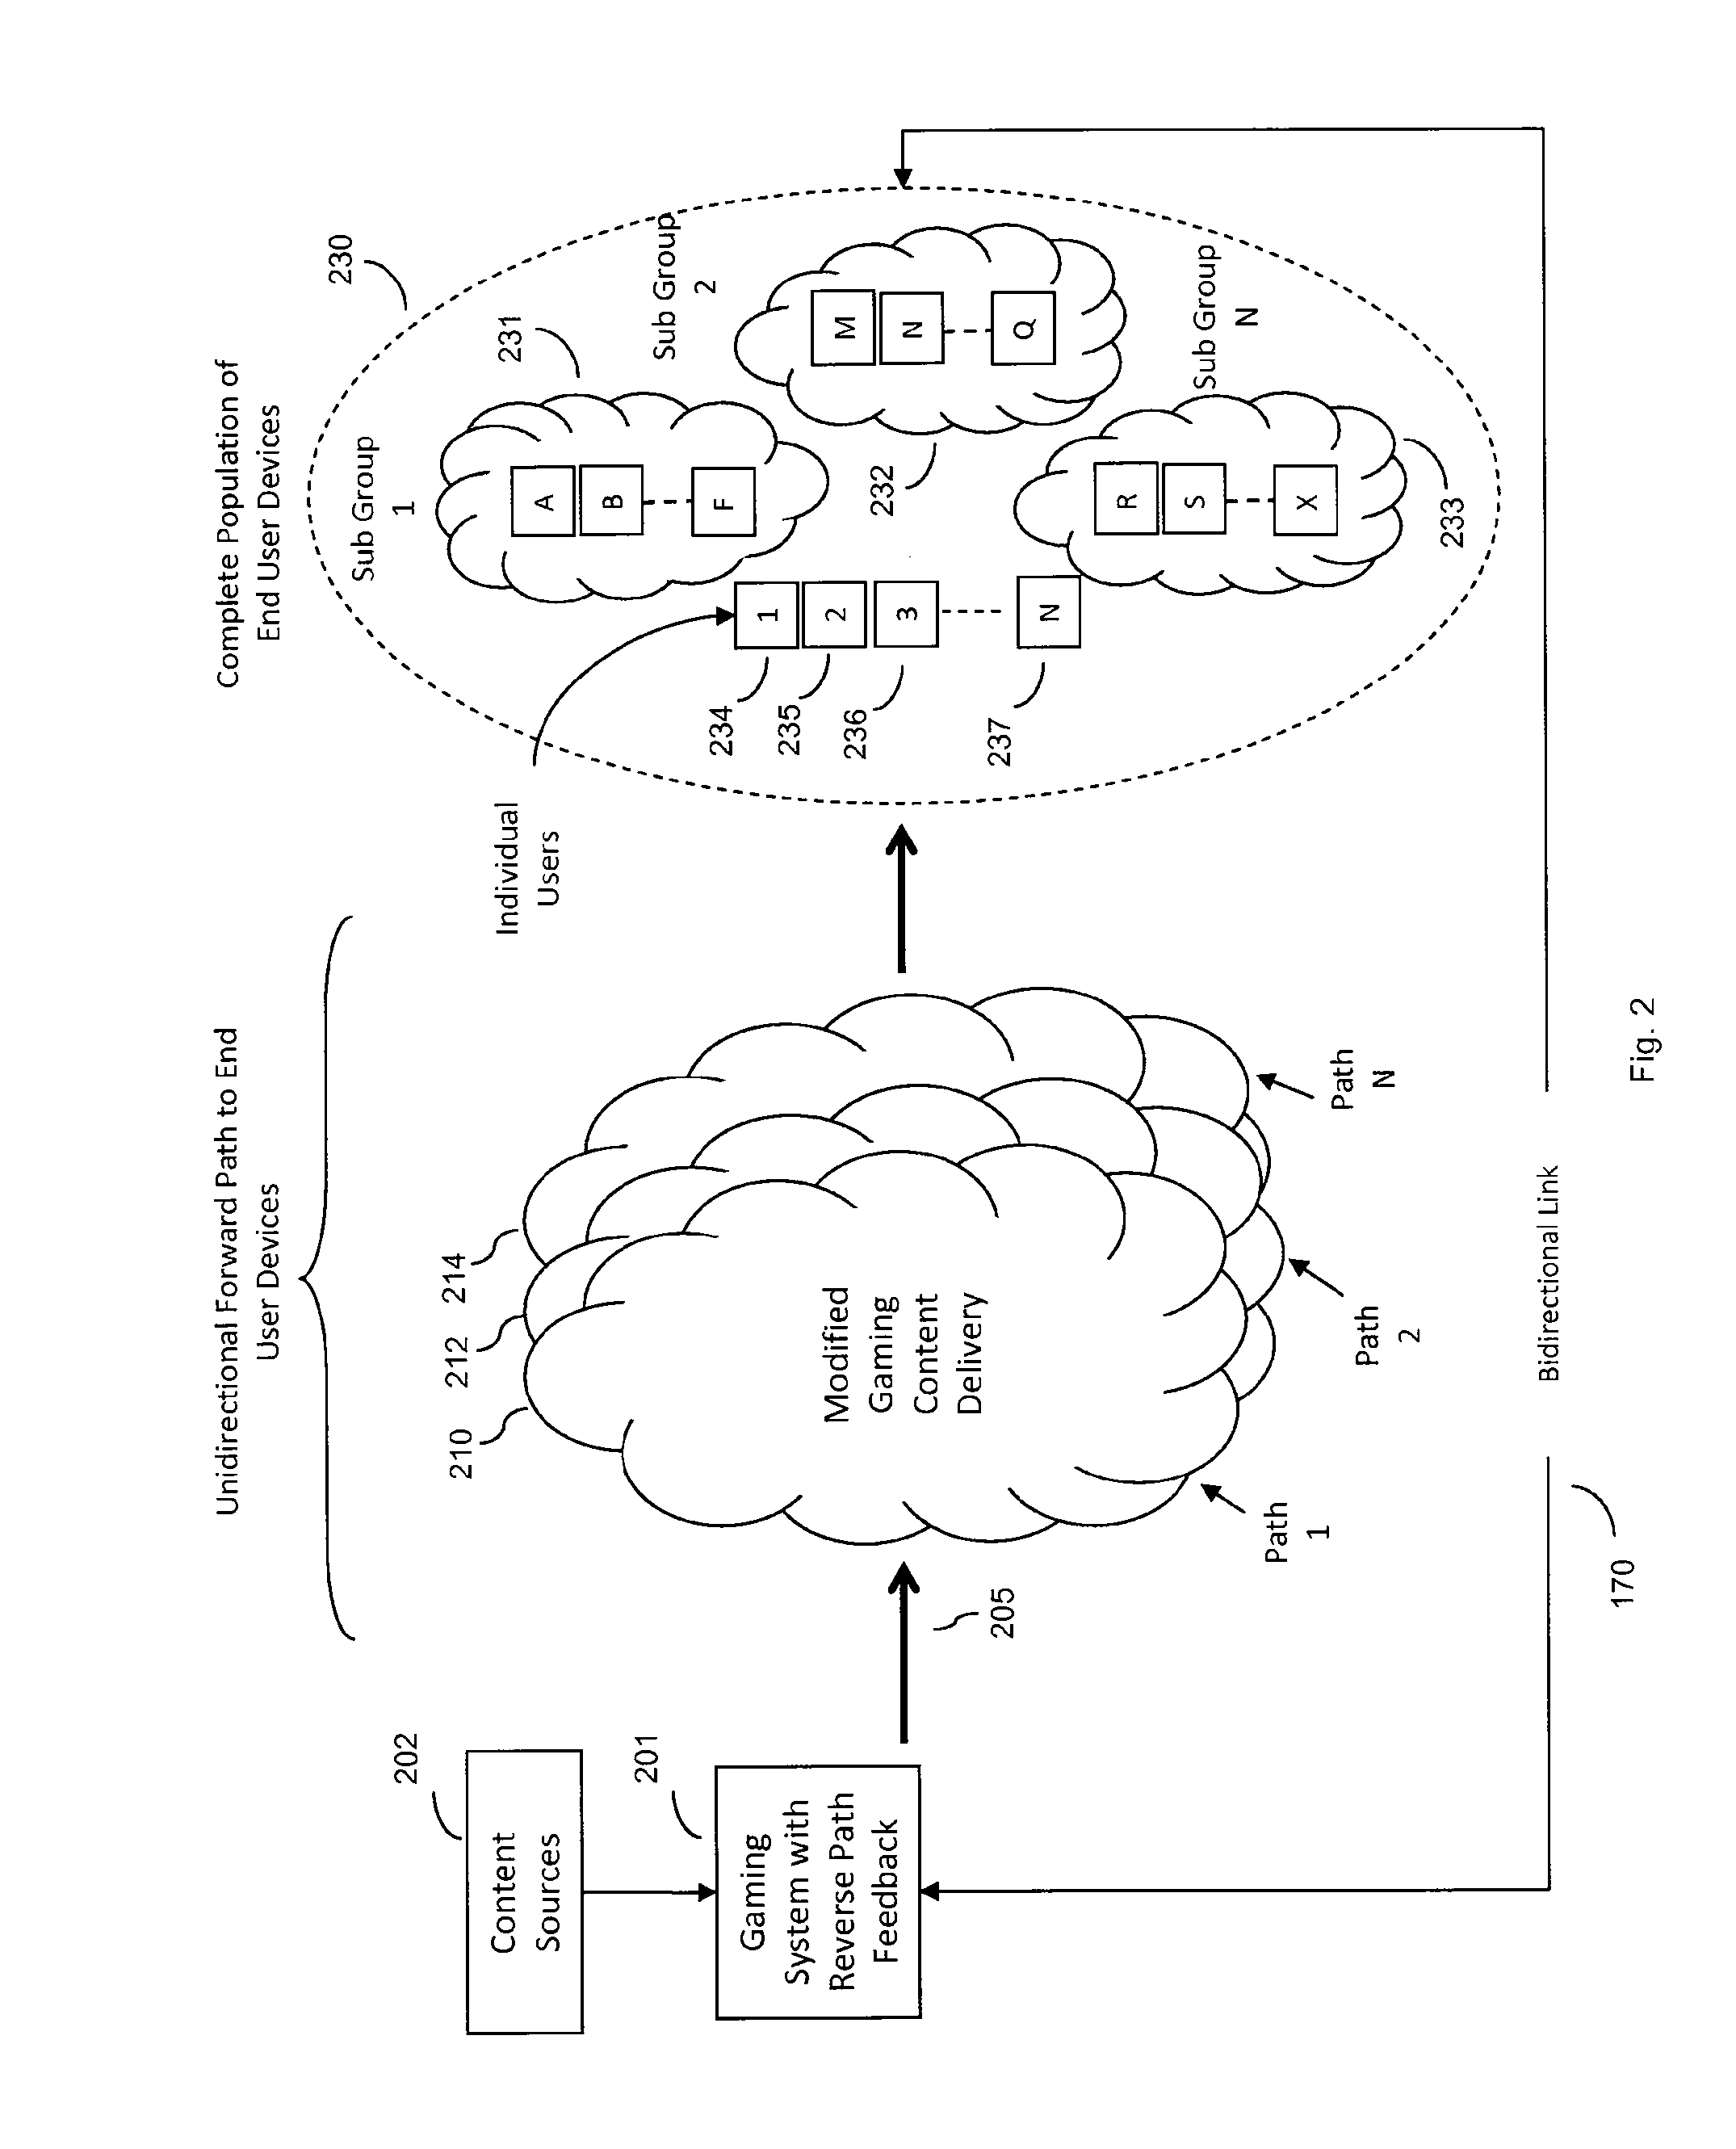 Gaming system with end user feedback for a communication network having a multi-media management